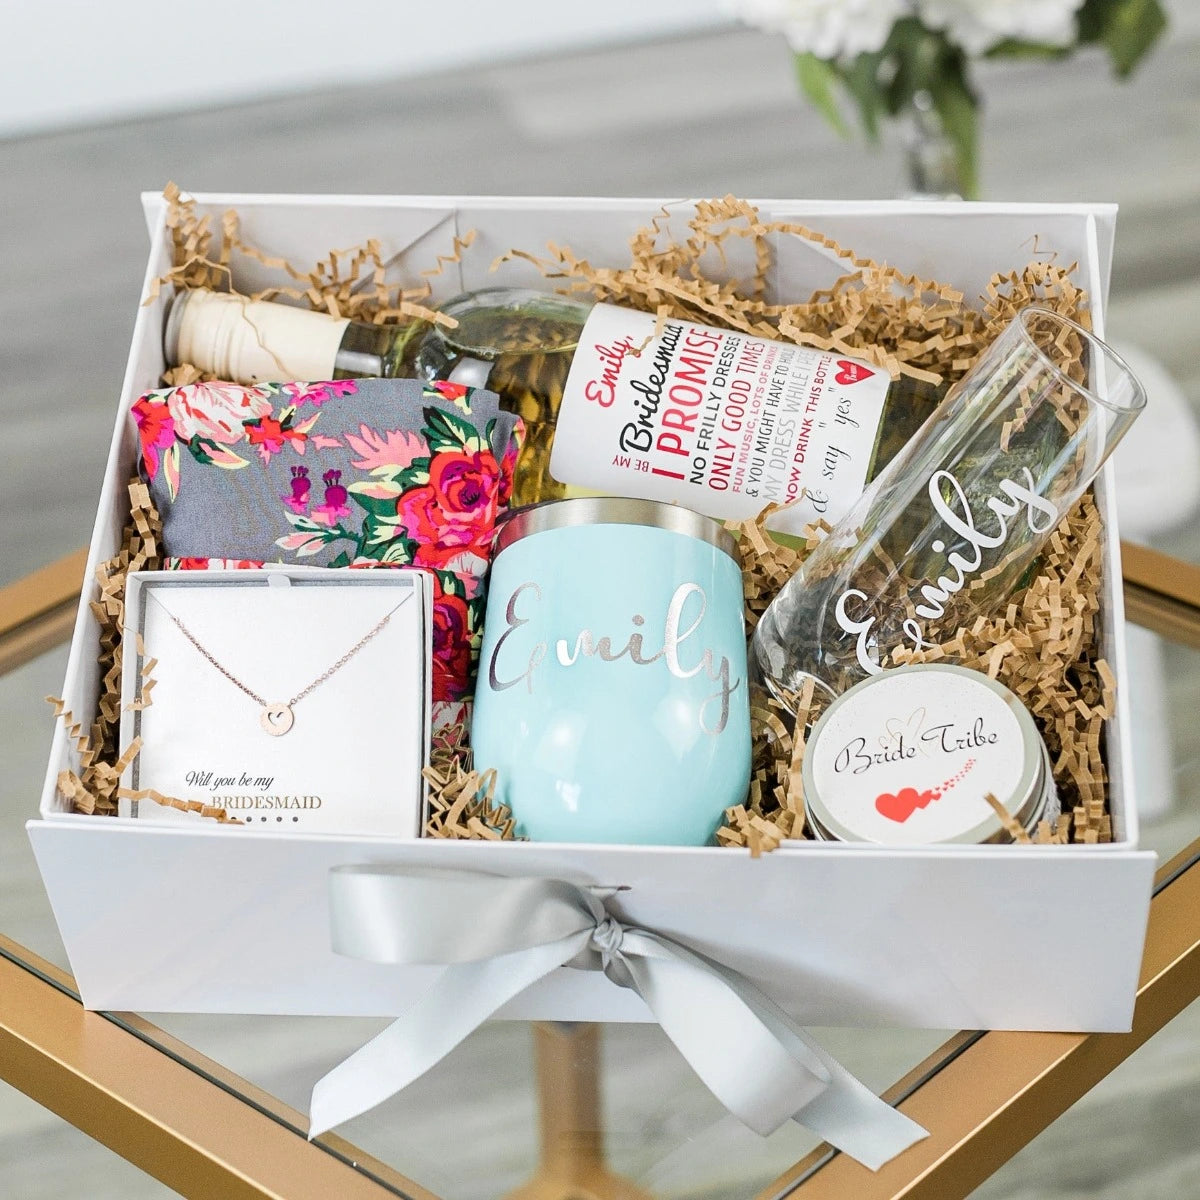 These 9 gift ideas are perfect for the bride in your life